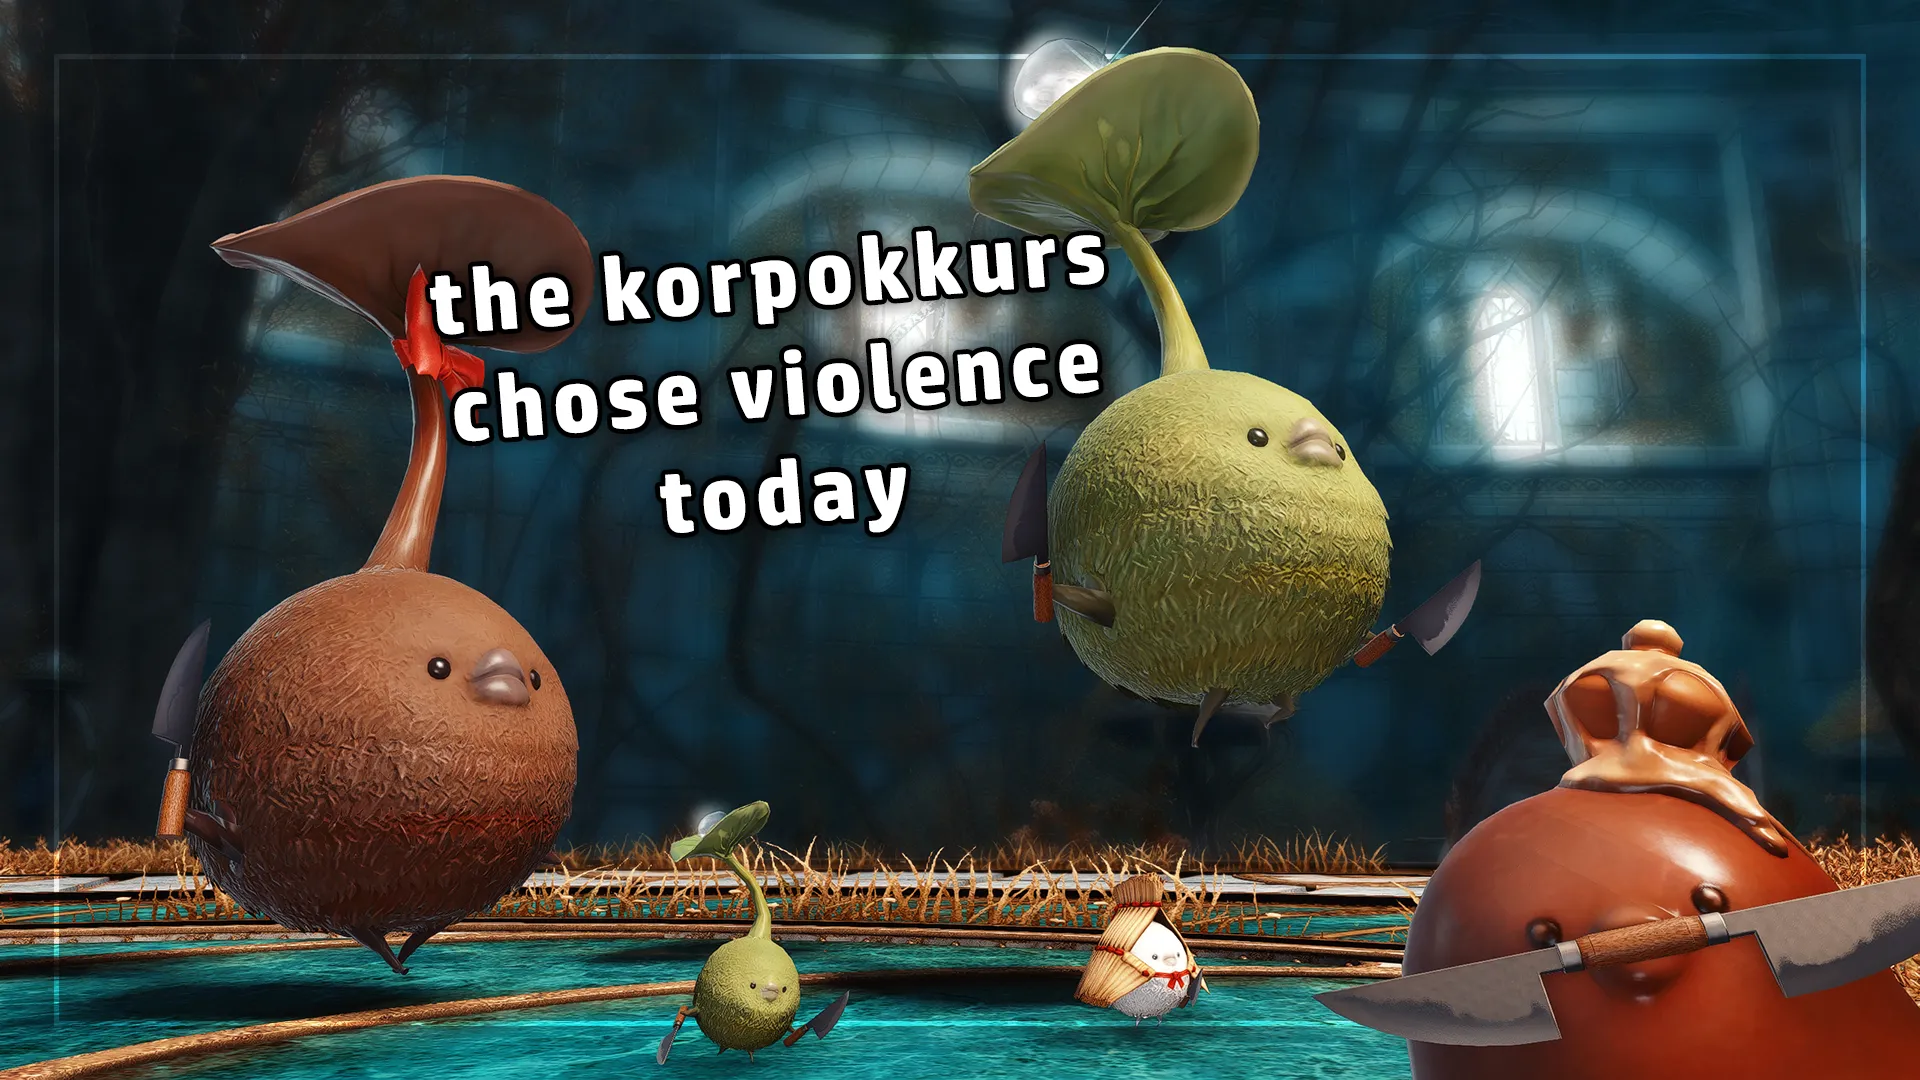 The korpokkurs chose violence today | Heliosphere